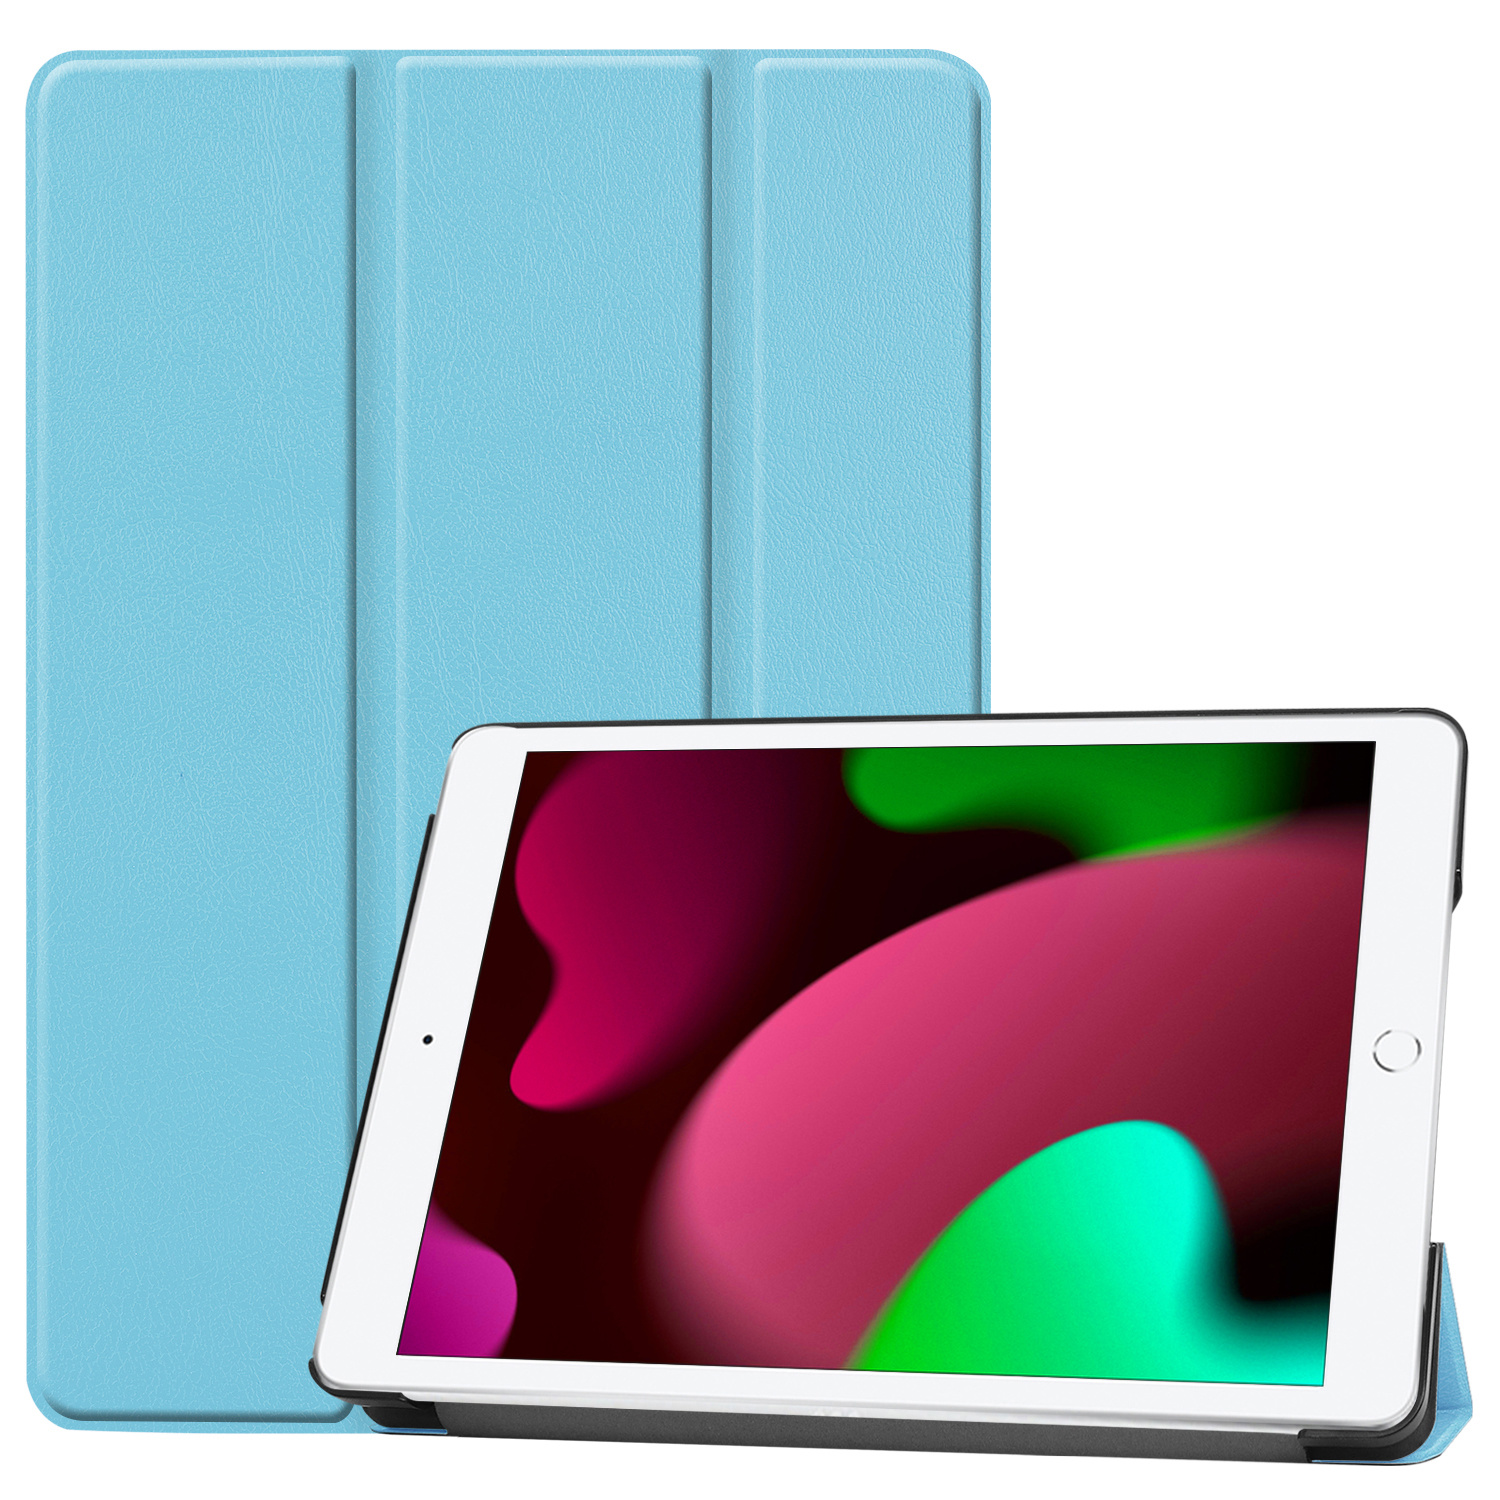 Nomfy iPad 10.2 2020 Hoesje Book Case Hoes - iPad 10.2 2020 Hoes Hardcover Case Hoesje - Lichtblauw